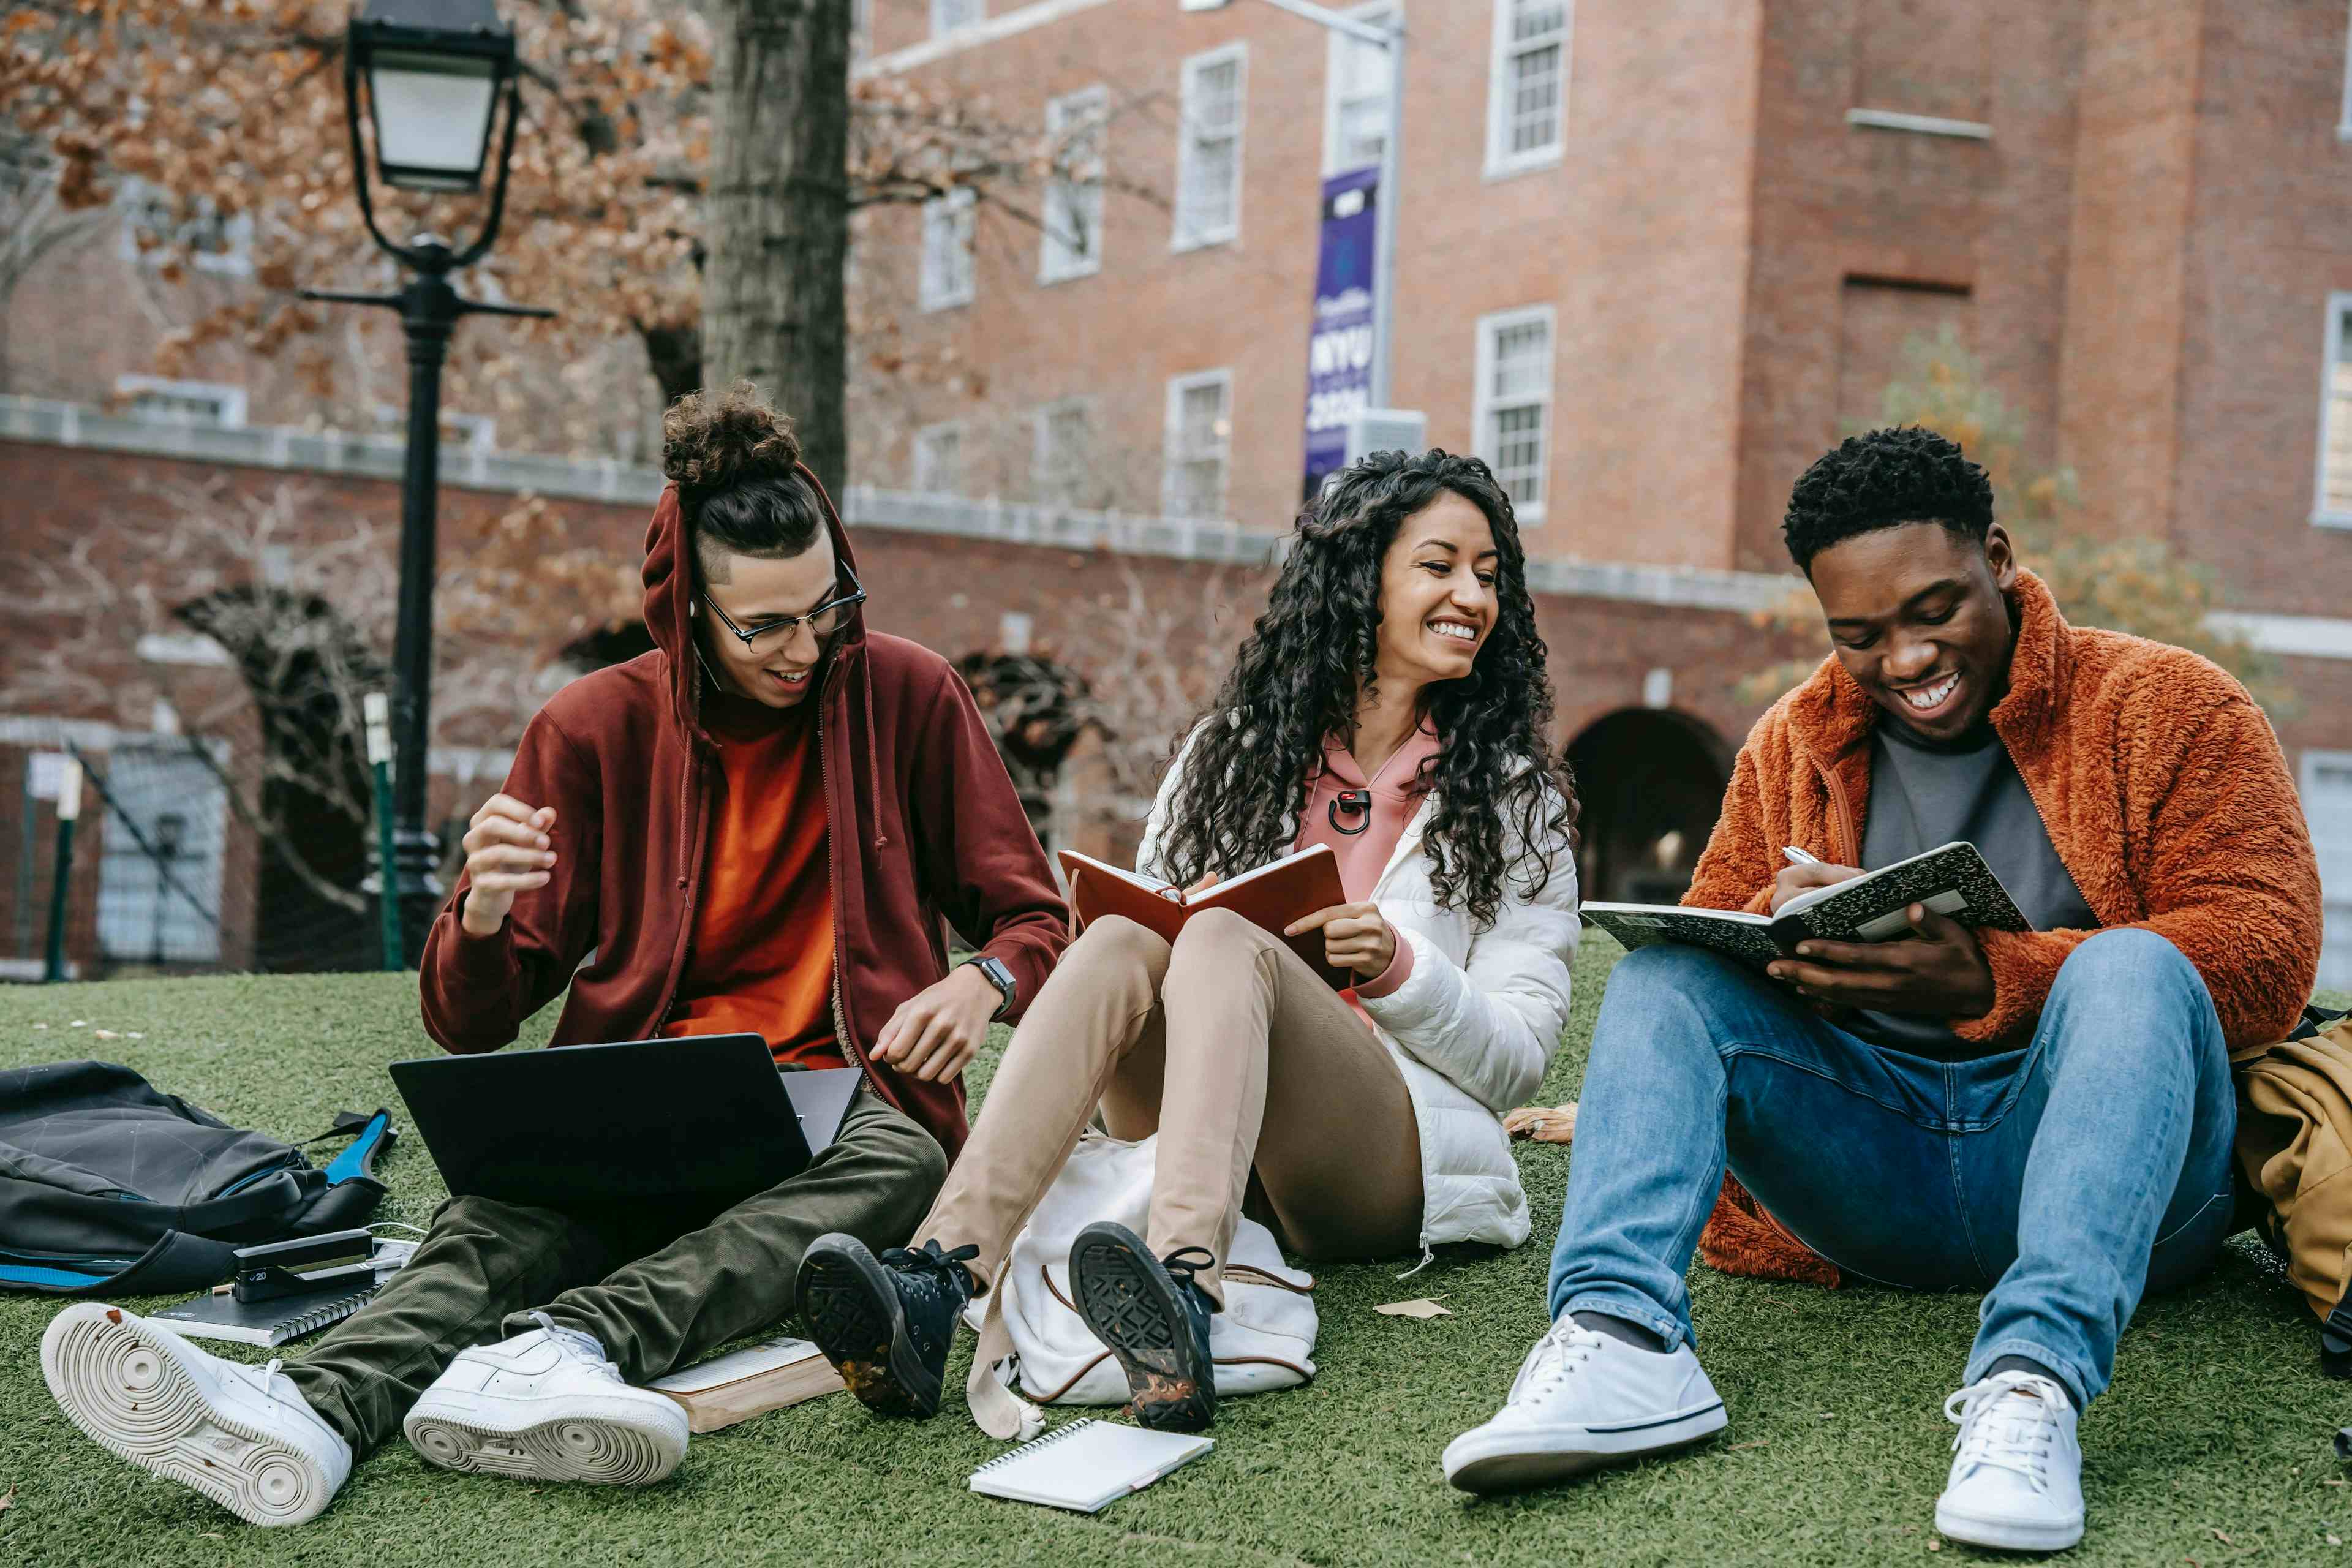 Three students sitting on the grass at a college campus